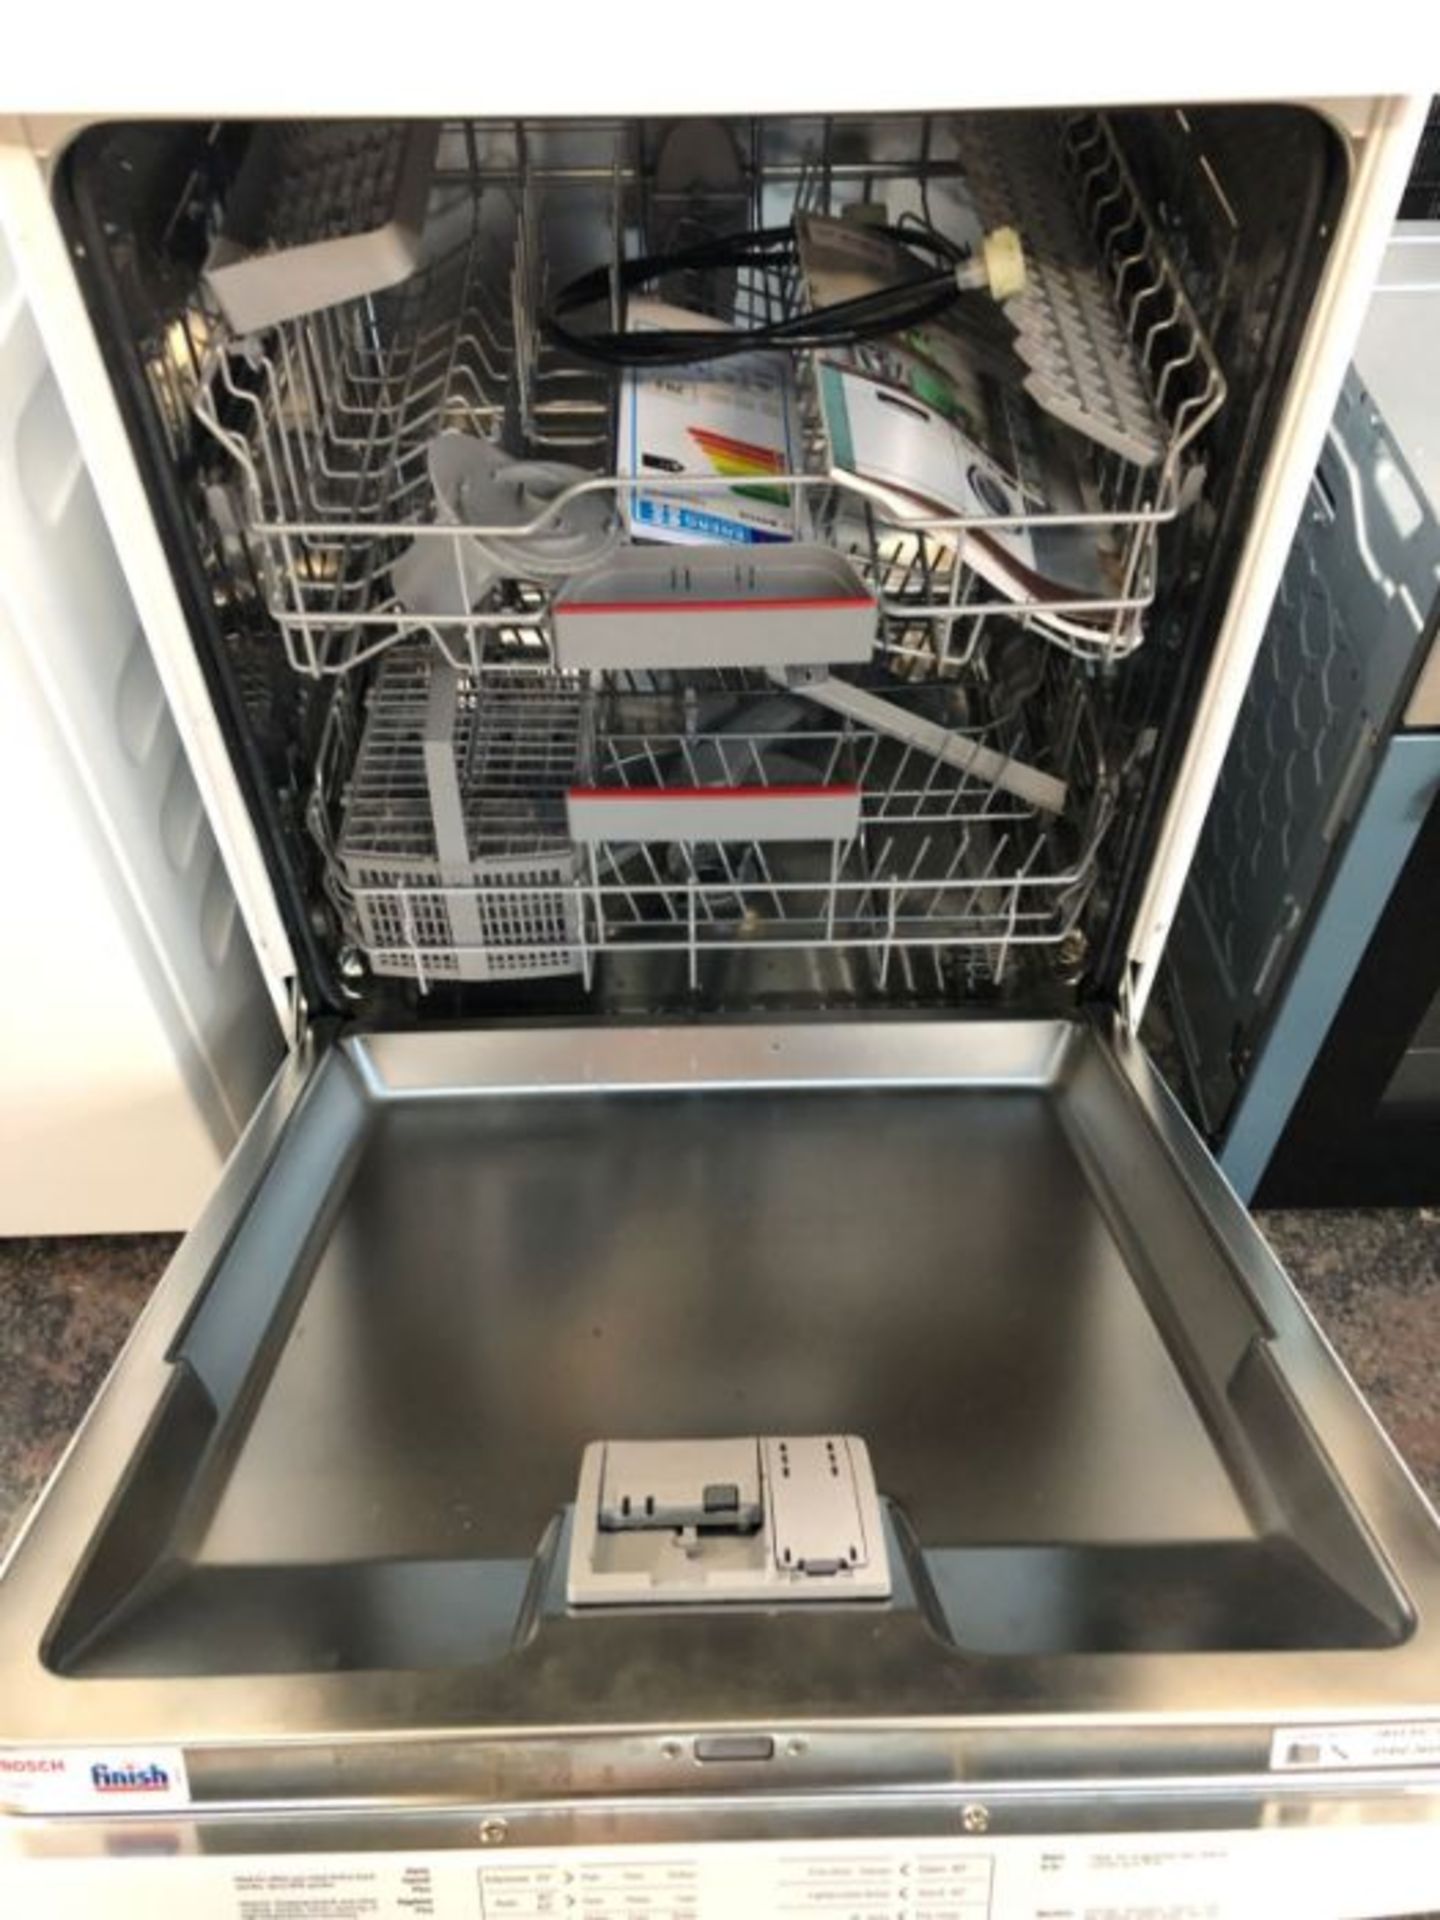 BOSCH SERIE 2 SMS46IW10G FREESTANDING DISHWASHER - Image 2 of 4